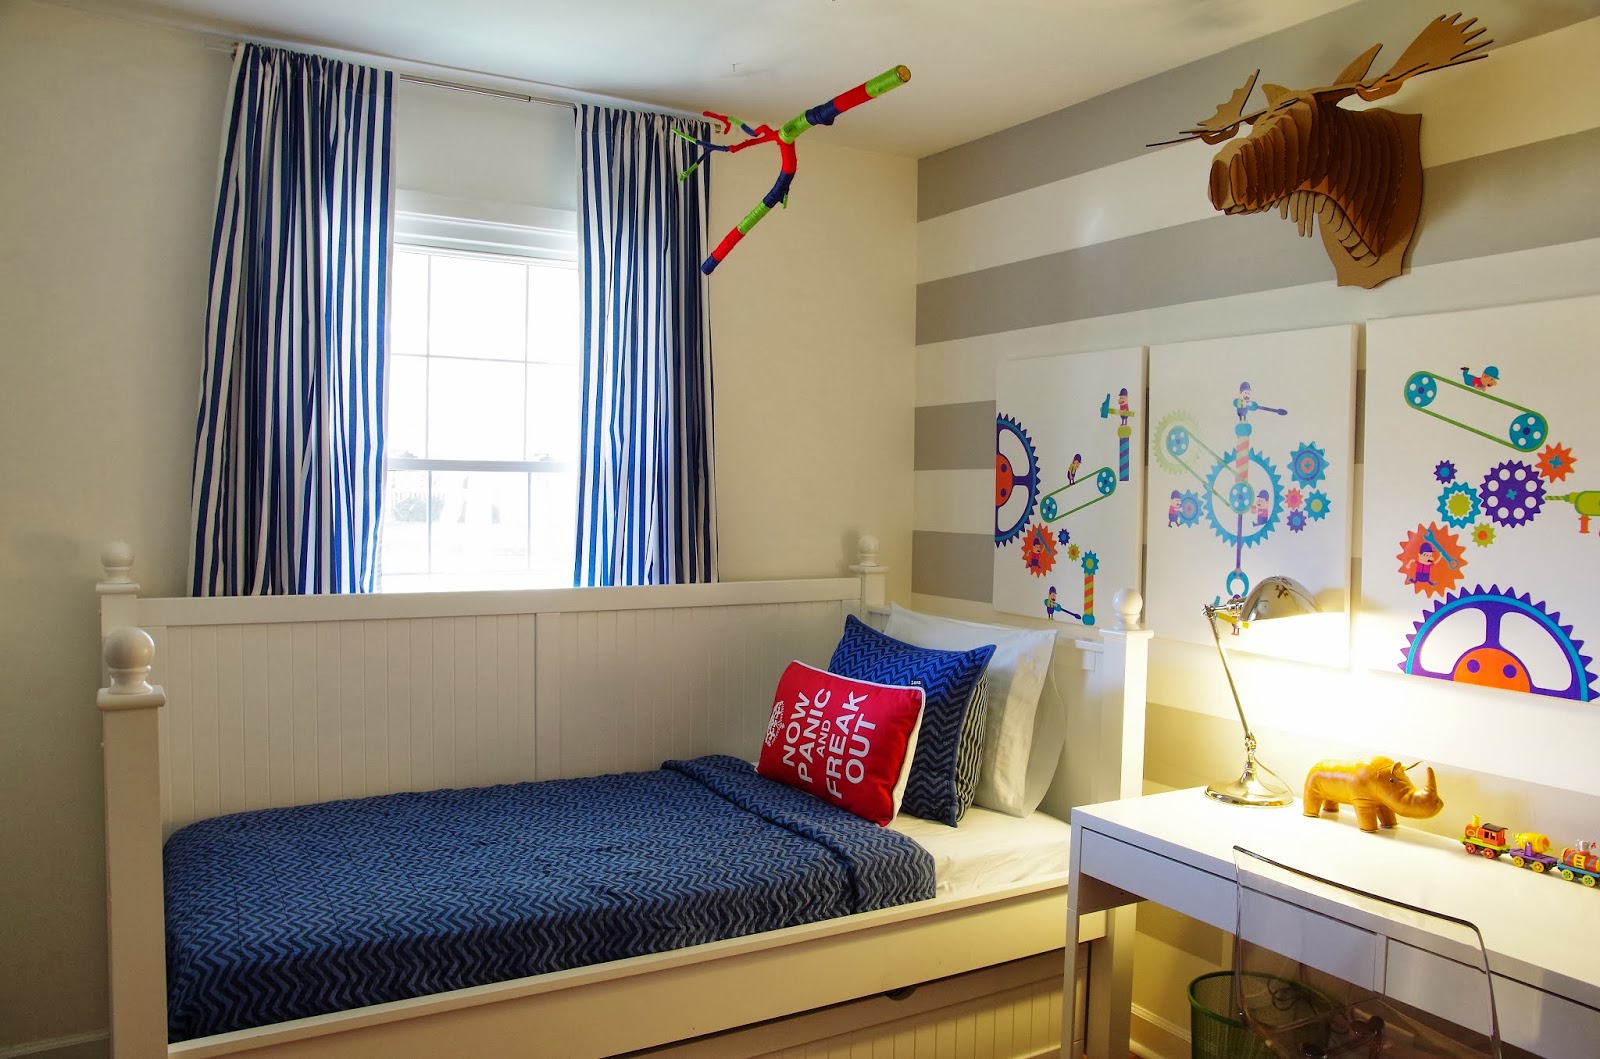 Mix and Chic: My son's bedroom revealed!